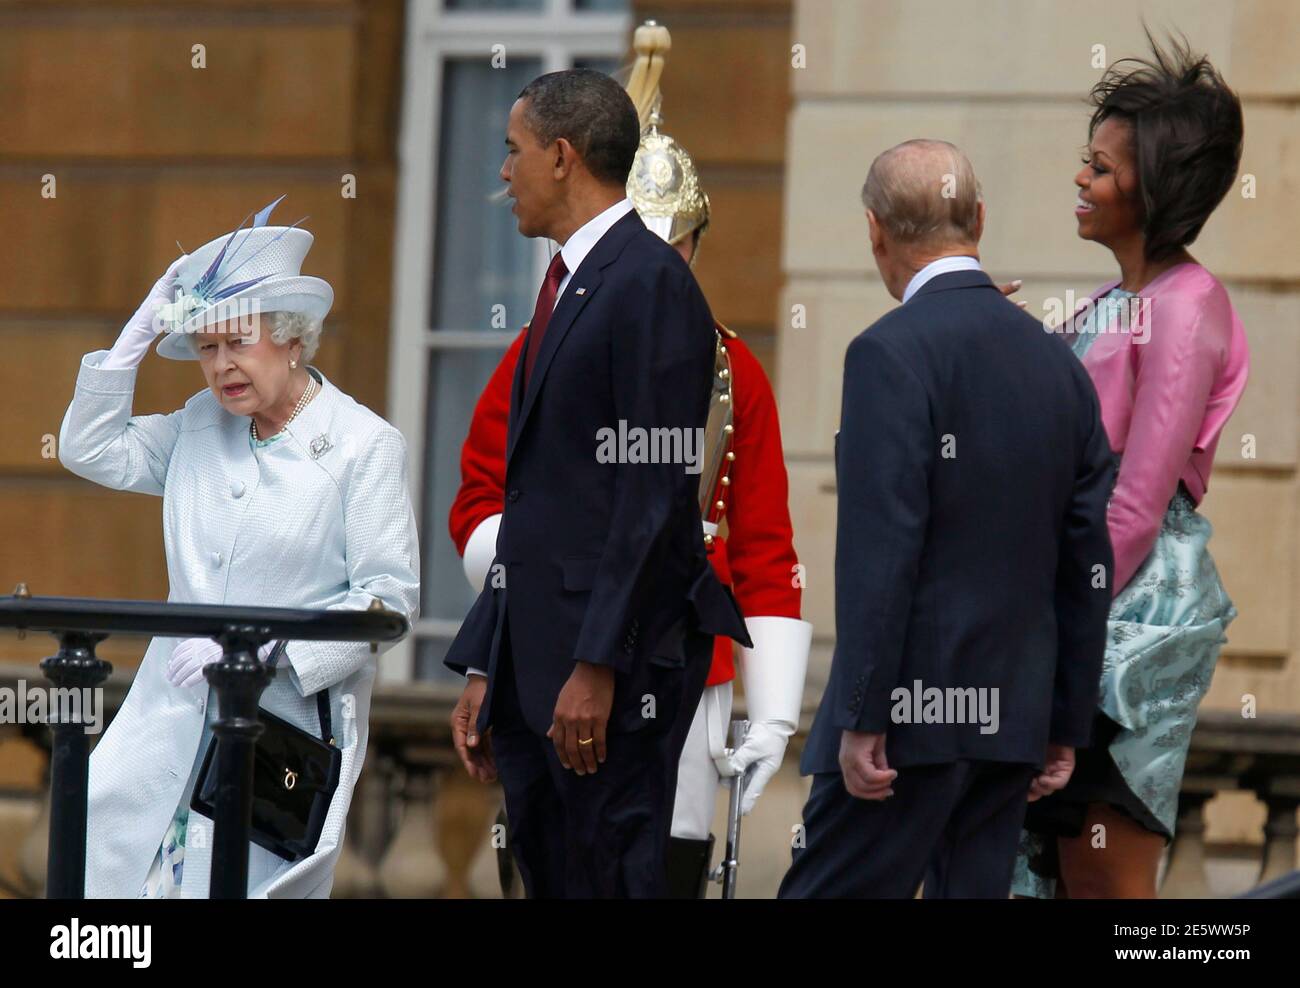 U.S. President Barack Obama (2nd L), first lady Michelle Obama (R), Queen Elizabeth II (L) and Prince Phillip, Duke of Edinburg (2nd R) participate in an official arrival ceremony on the Buckingham Palace Terrace stairs in London May 24, 2011.         REUTERS/Larry Downing      (BRITAIN - Tags: POLITICS ROYALS) Stock Photo